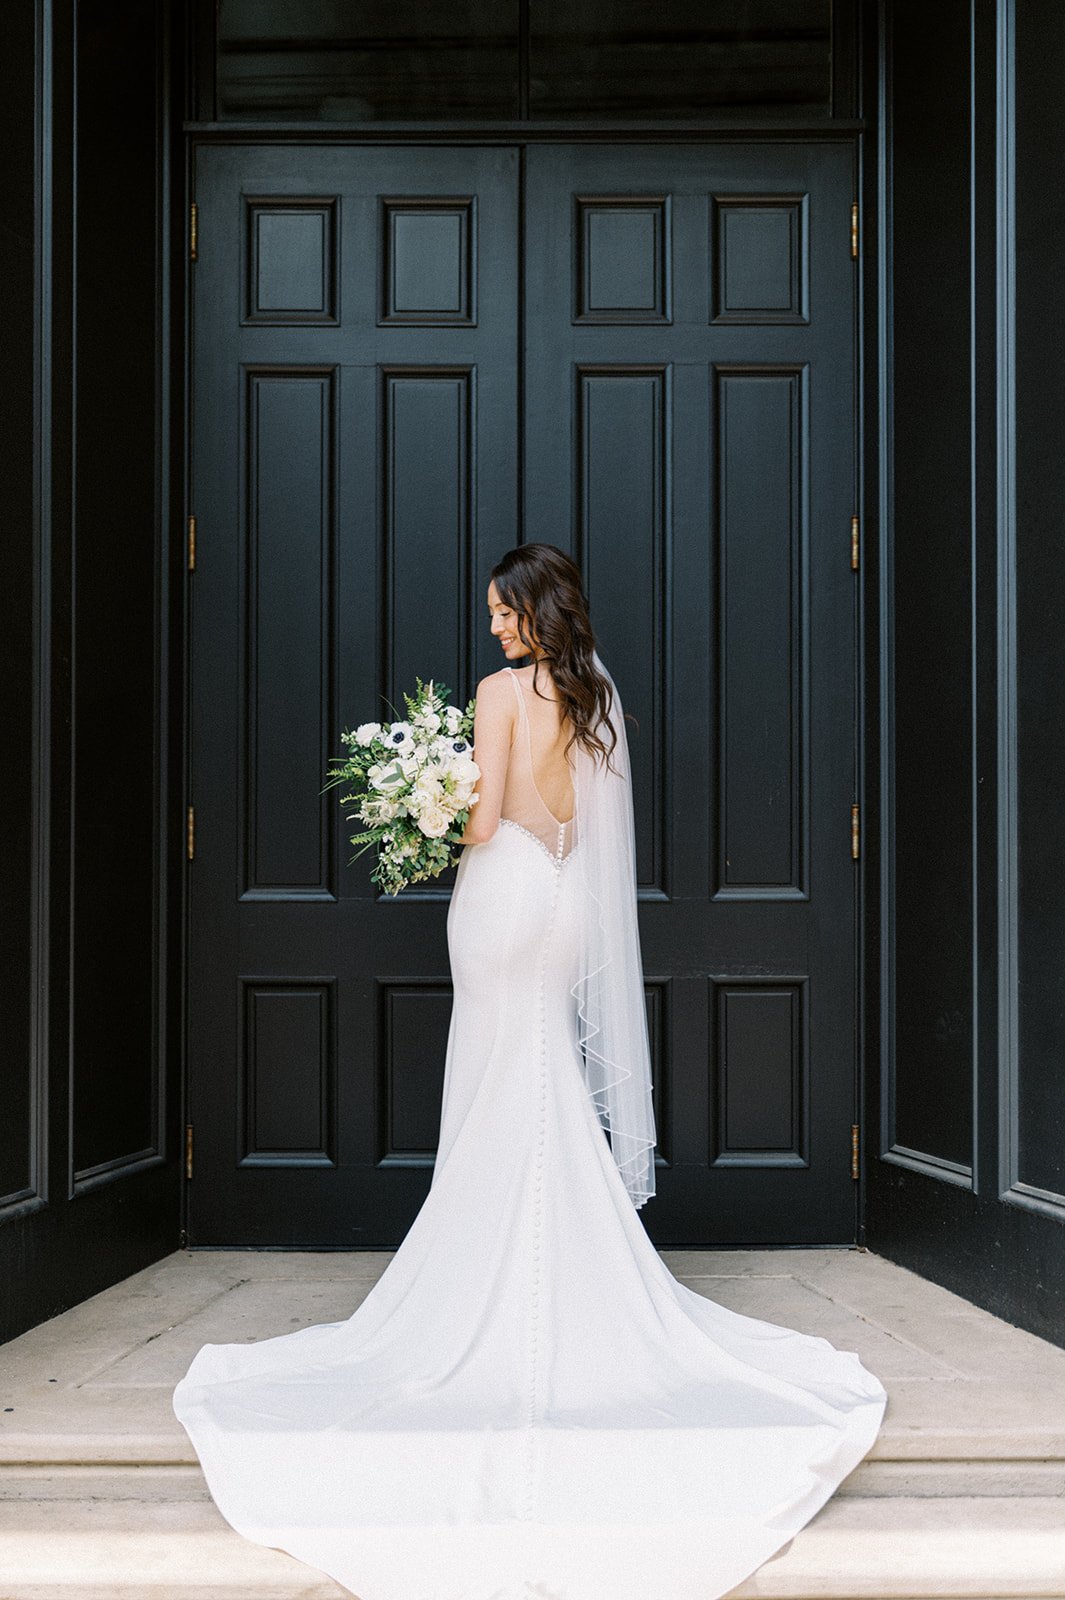 Classic bride with bouquet of white flowers looking at ground in front of black doors of Excelsior wedding venue